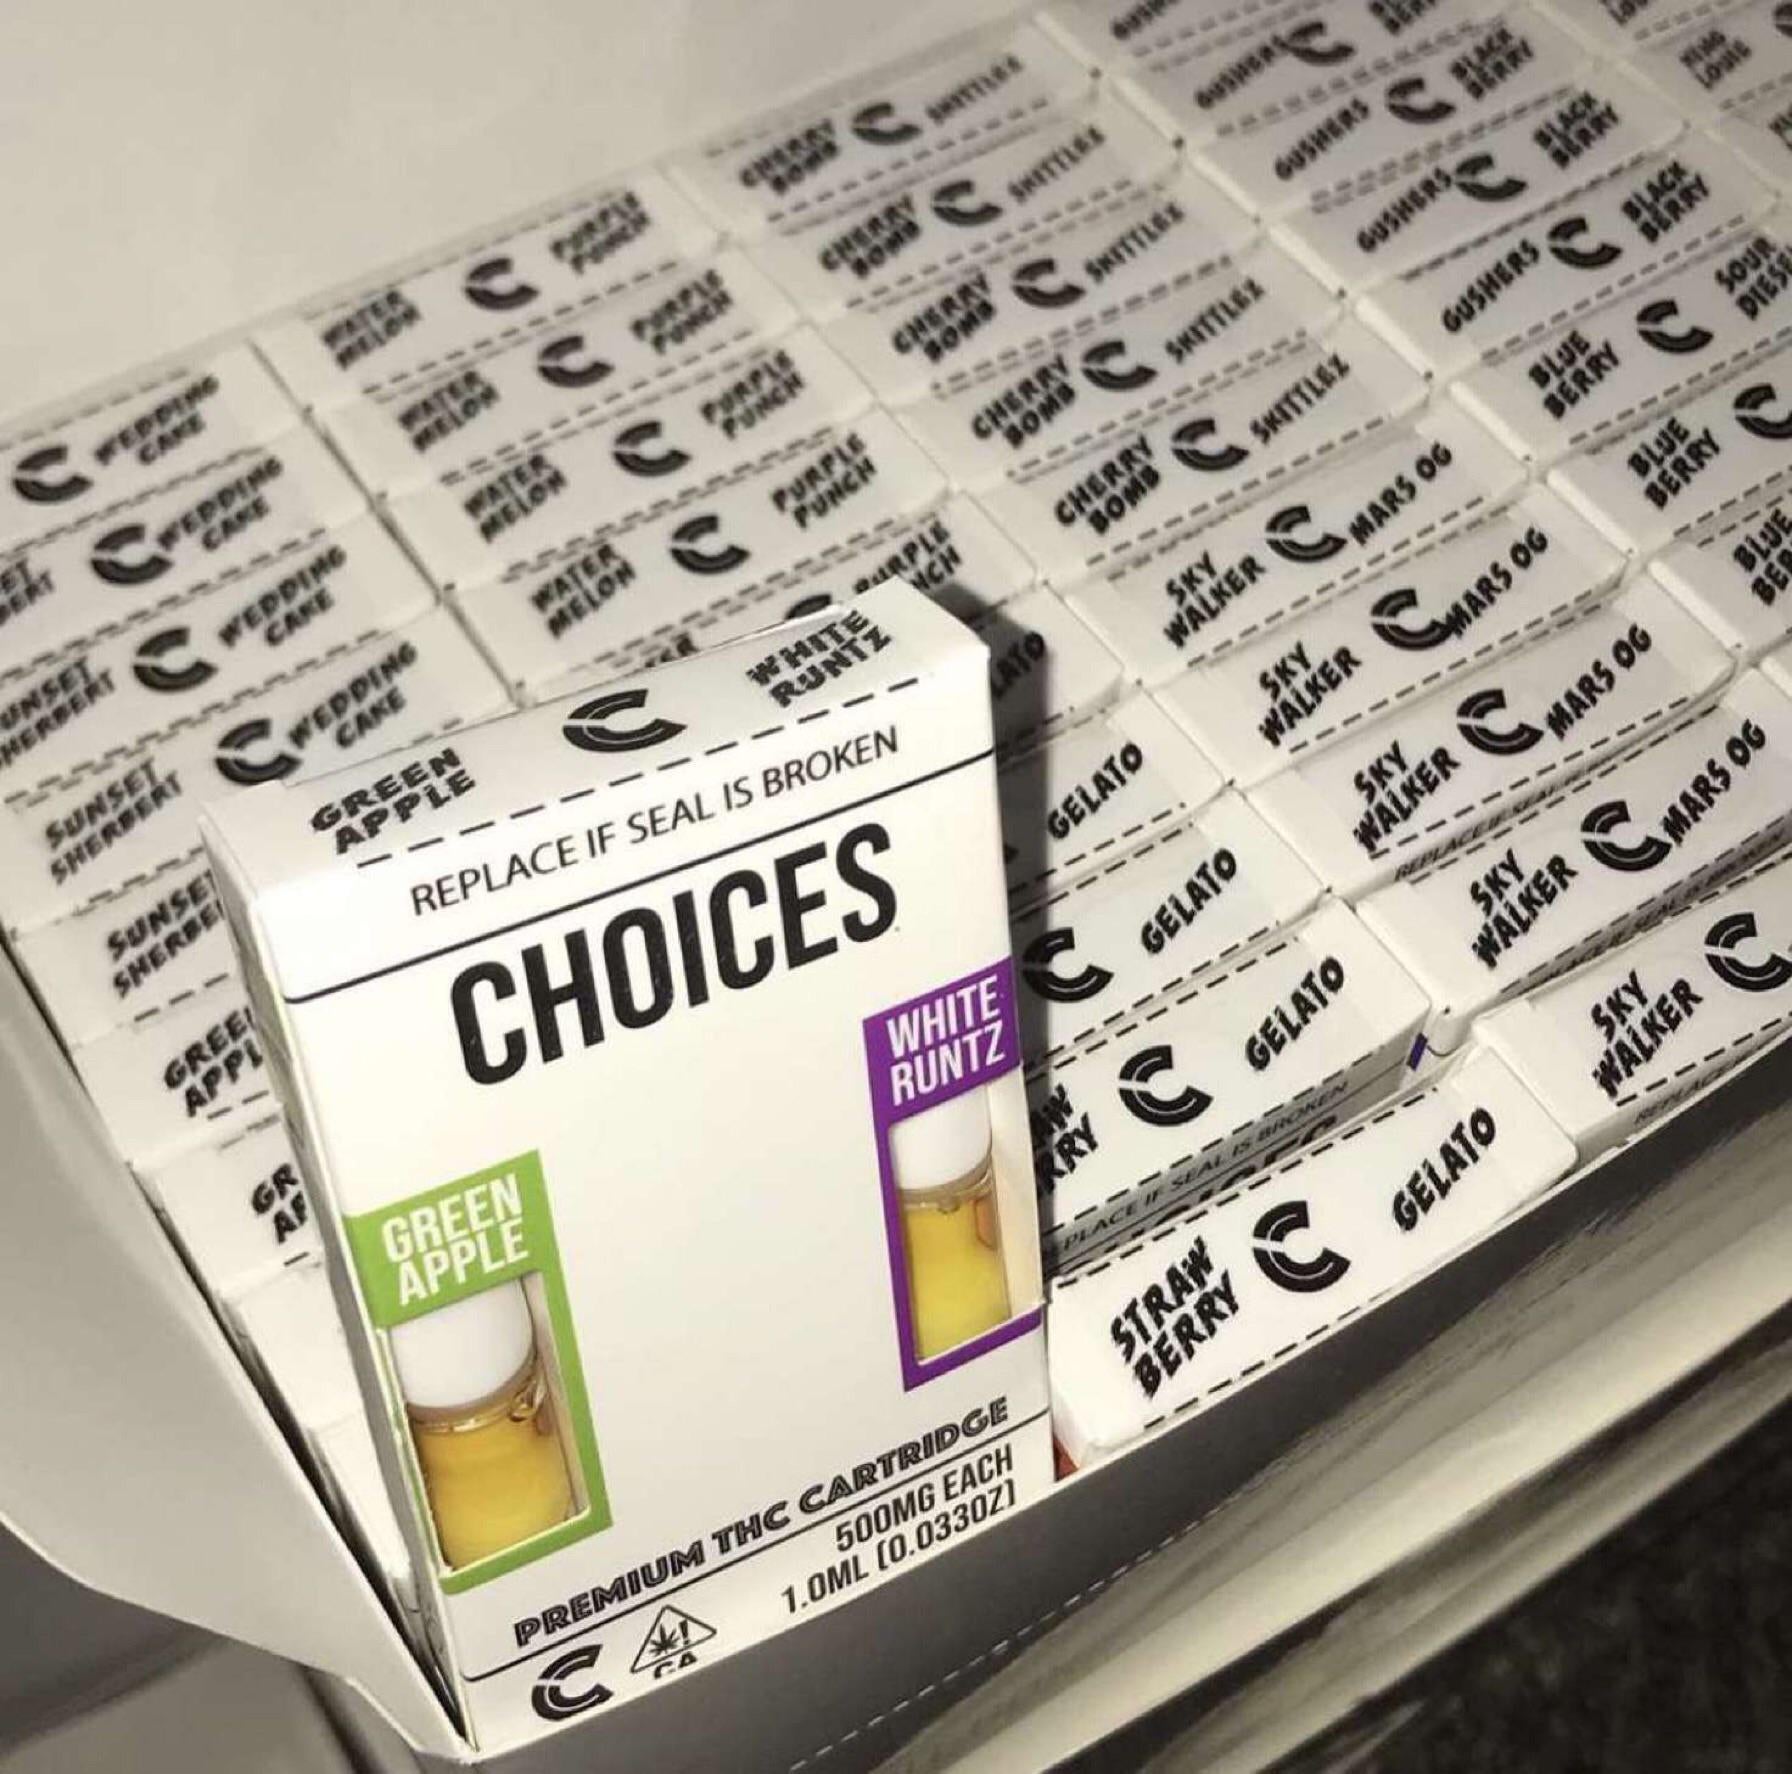 buy choices carts online, choice cartridges, choice carts, choice carts flavors, choice carts for sale, choice carts review, choice carts website, choices cartridge, choices carts, choices carts 2 in 1, choices carts for sale, choices carts thc, order choices carts online, trappers choice carts, where to buy choices carts, choices carts review